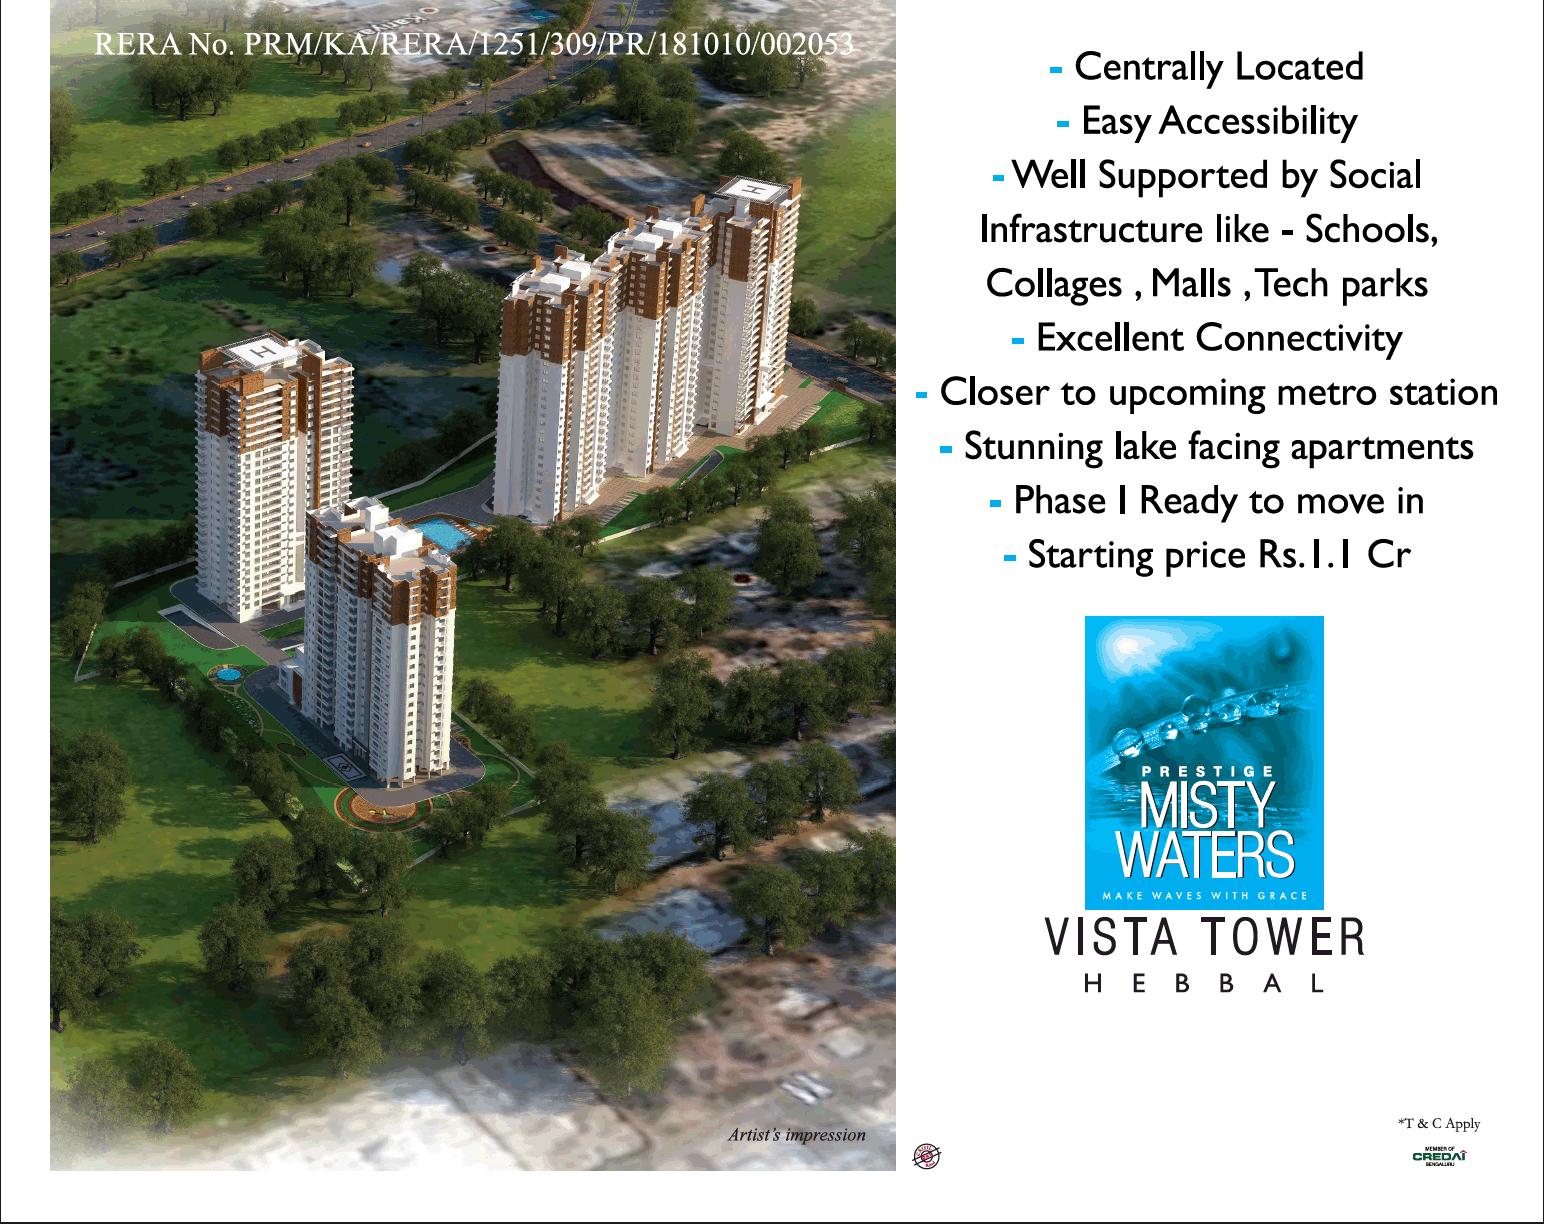 Phase 1 ready to move in price starting Rs 1 Cr at Misty Waters Vista Tower, Bangalore Update